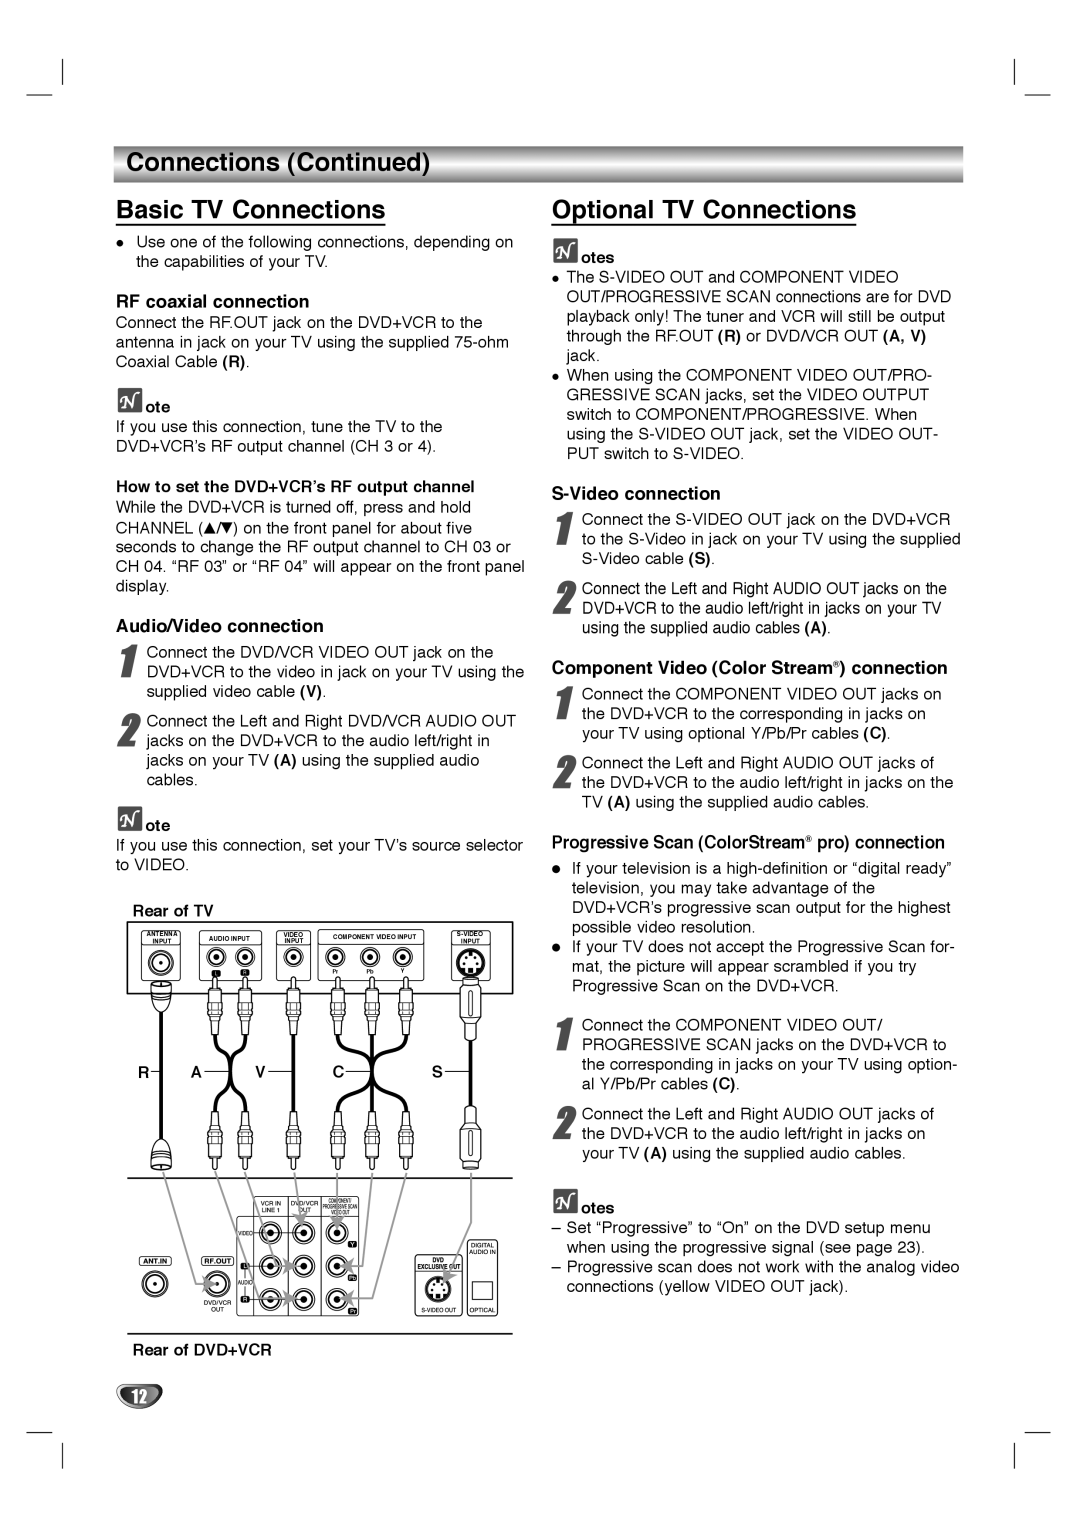 Dolby Laboratories HT2030 manual Connections Continued Basic TV Connections, Optional TV Connections, RF coaxial connection 